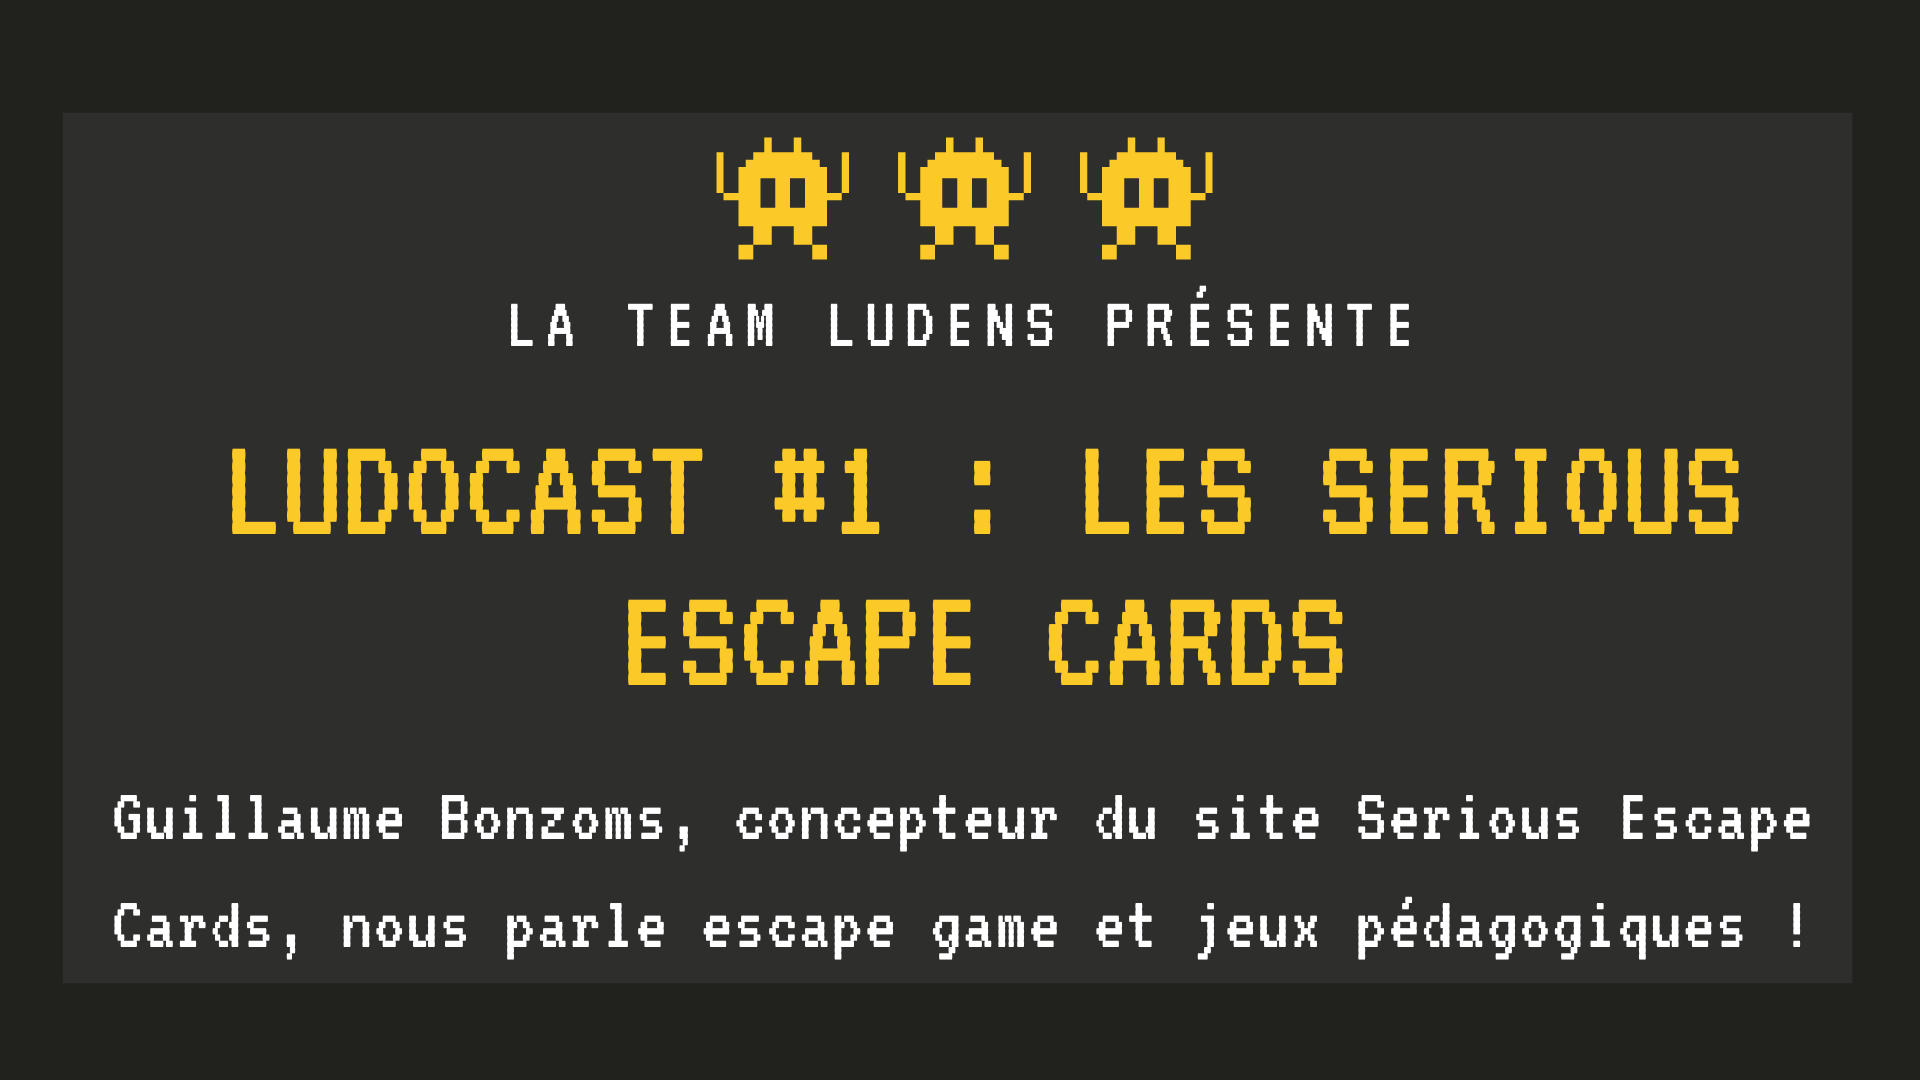 You are currently viewing Ludocast #1 : Les Serious Escape Cards (Guillaume Bonzoms)